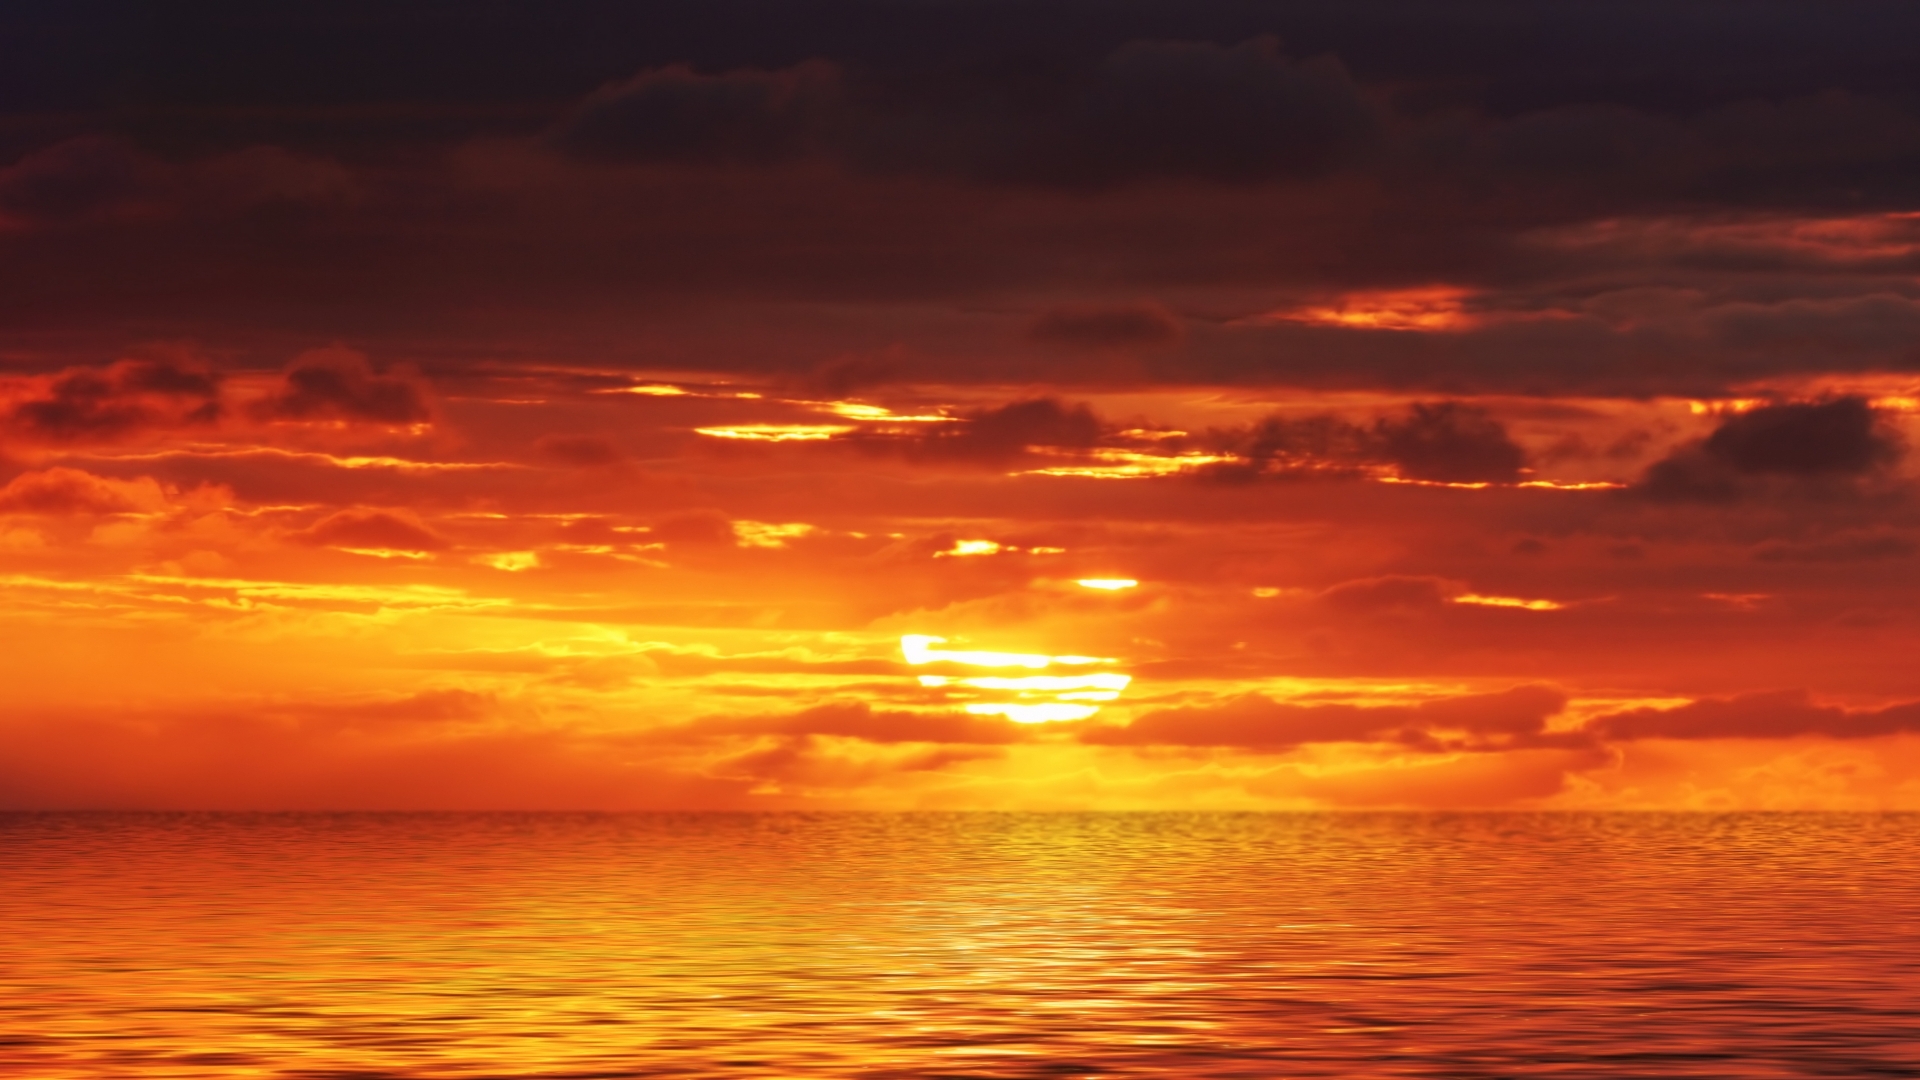 Free Download Of Sunset Wallpapers Images 6 HD Wallpapers